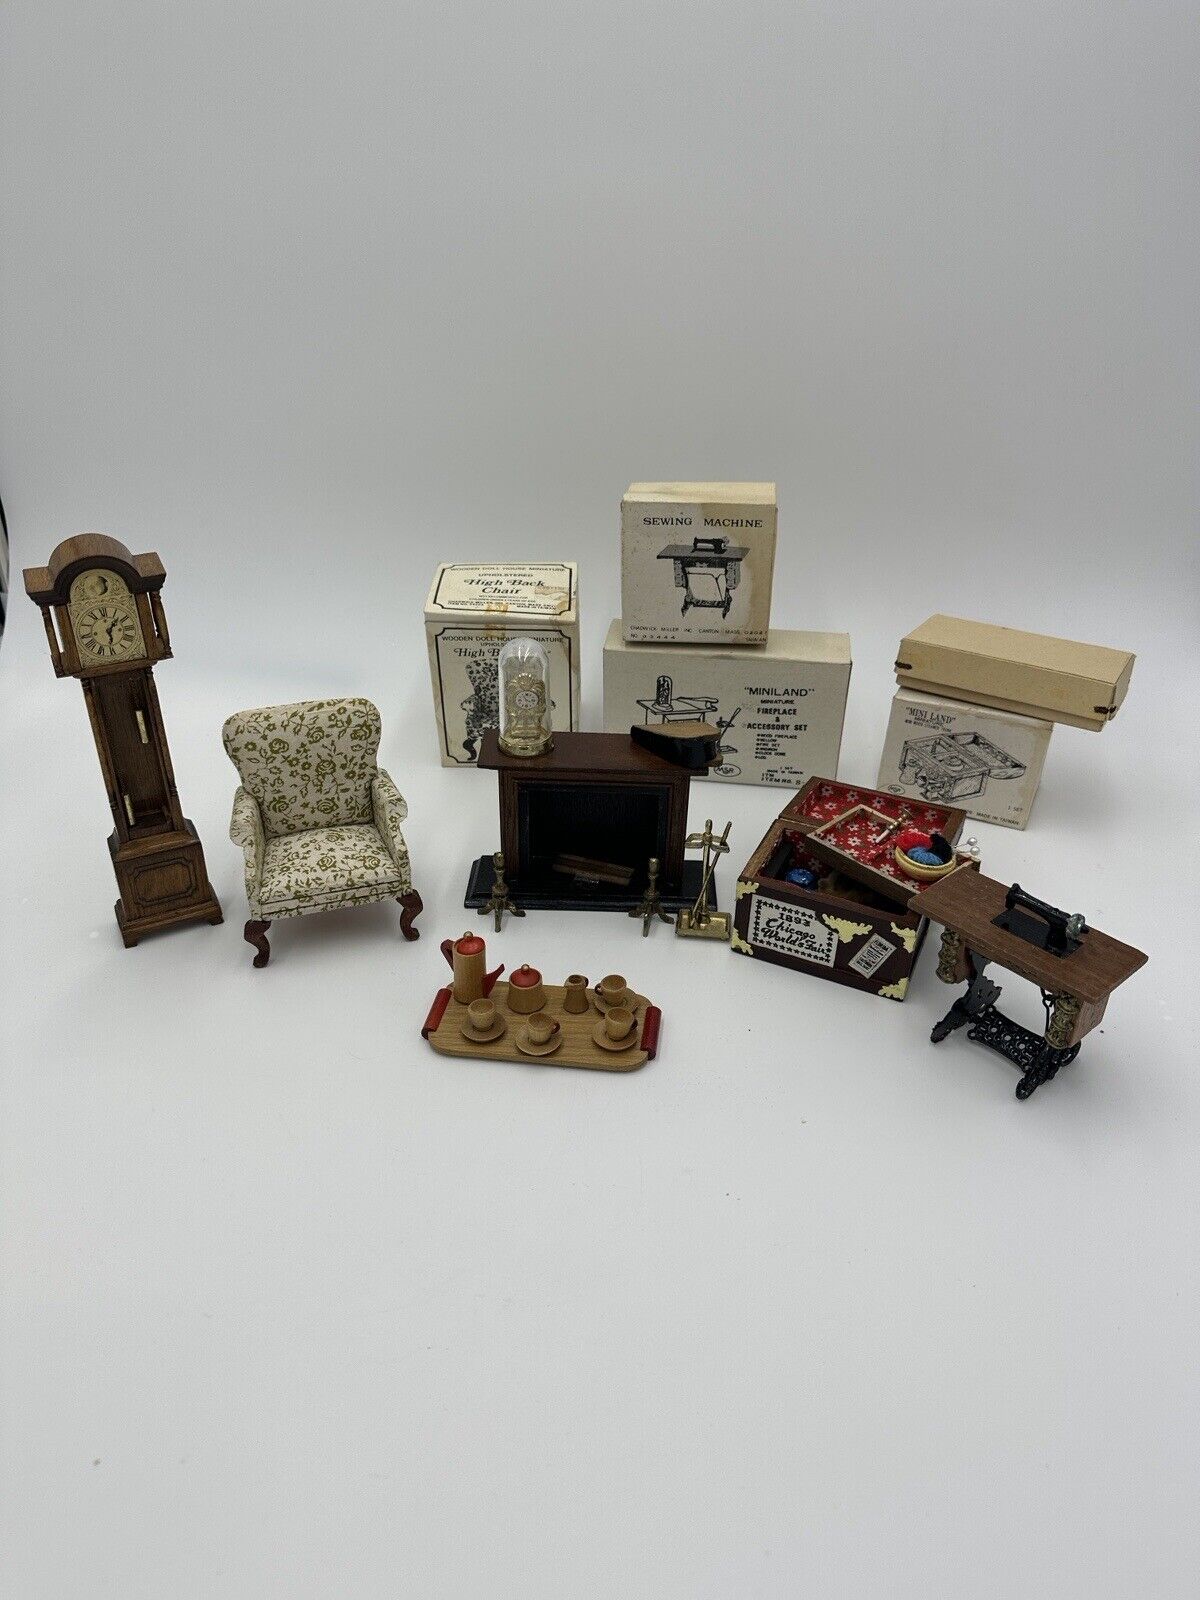 Dollhouse Furniture Clock Sewing Machine Land Chest Fireplace Chair Vintage Lot